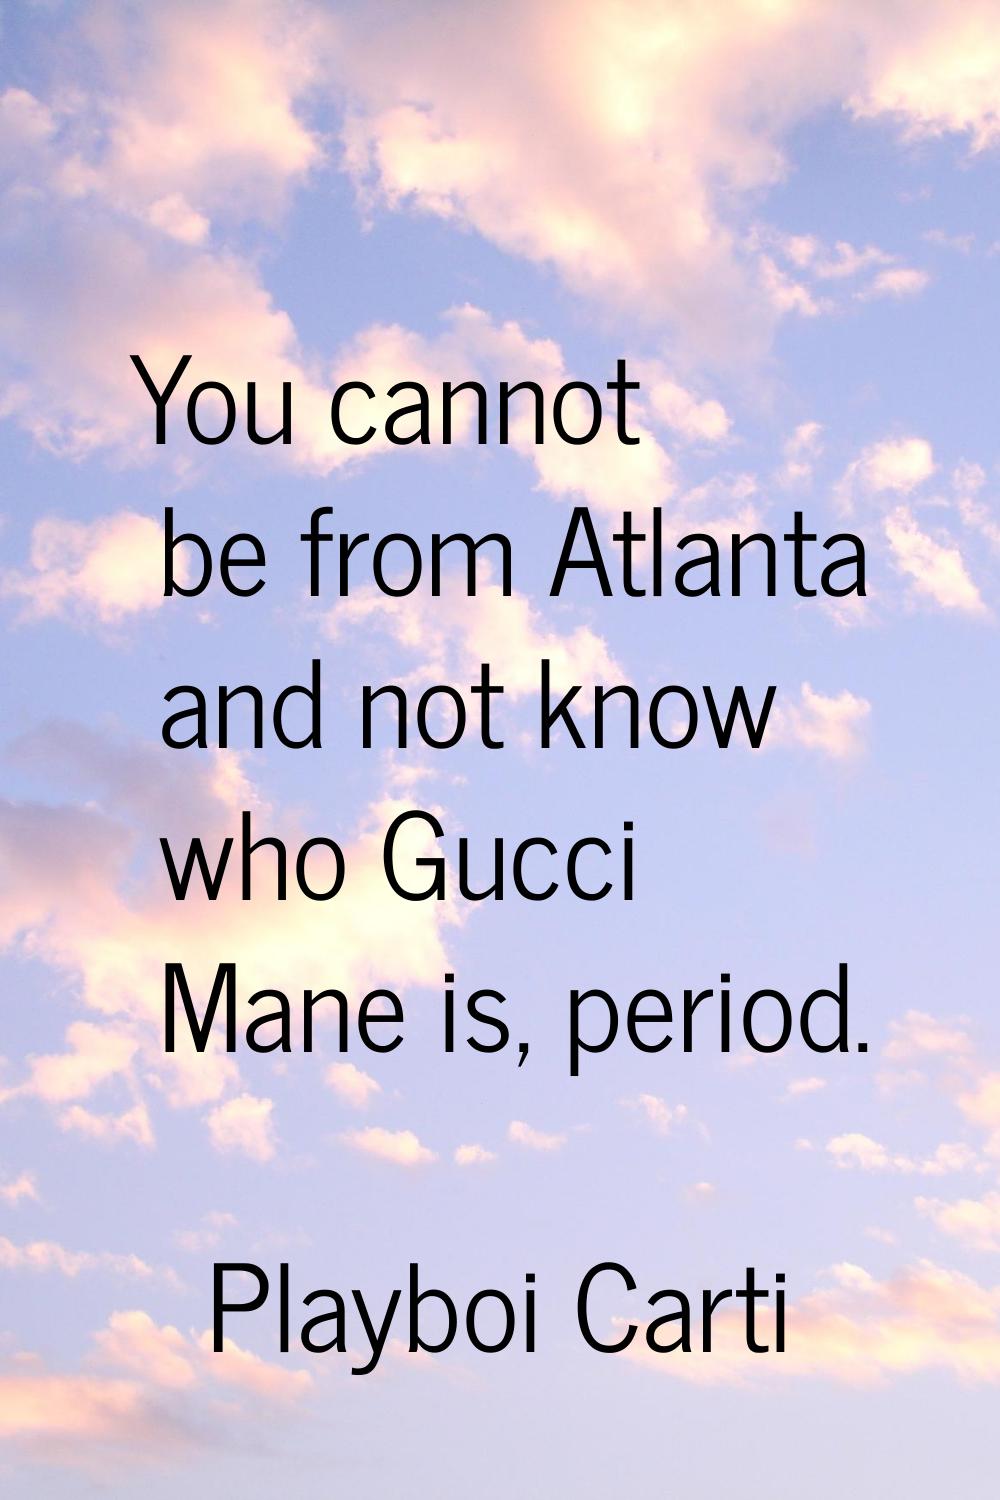 You cannot be from Atlanta and not know who Gucci Mane is, period.